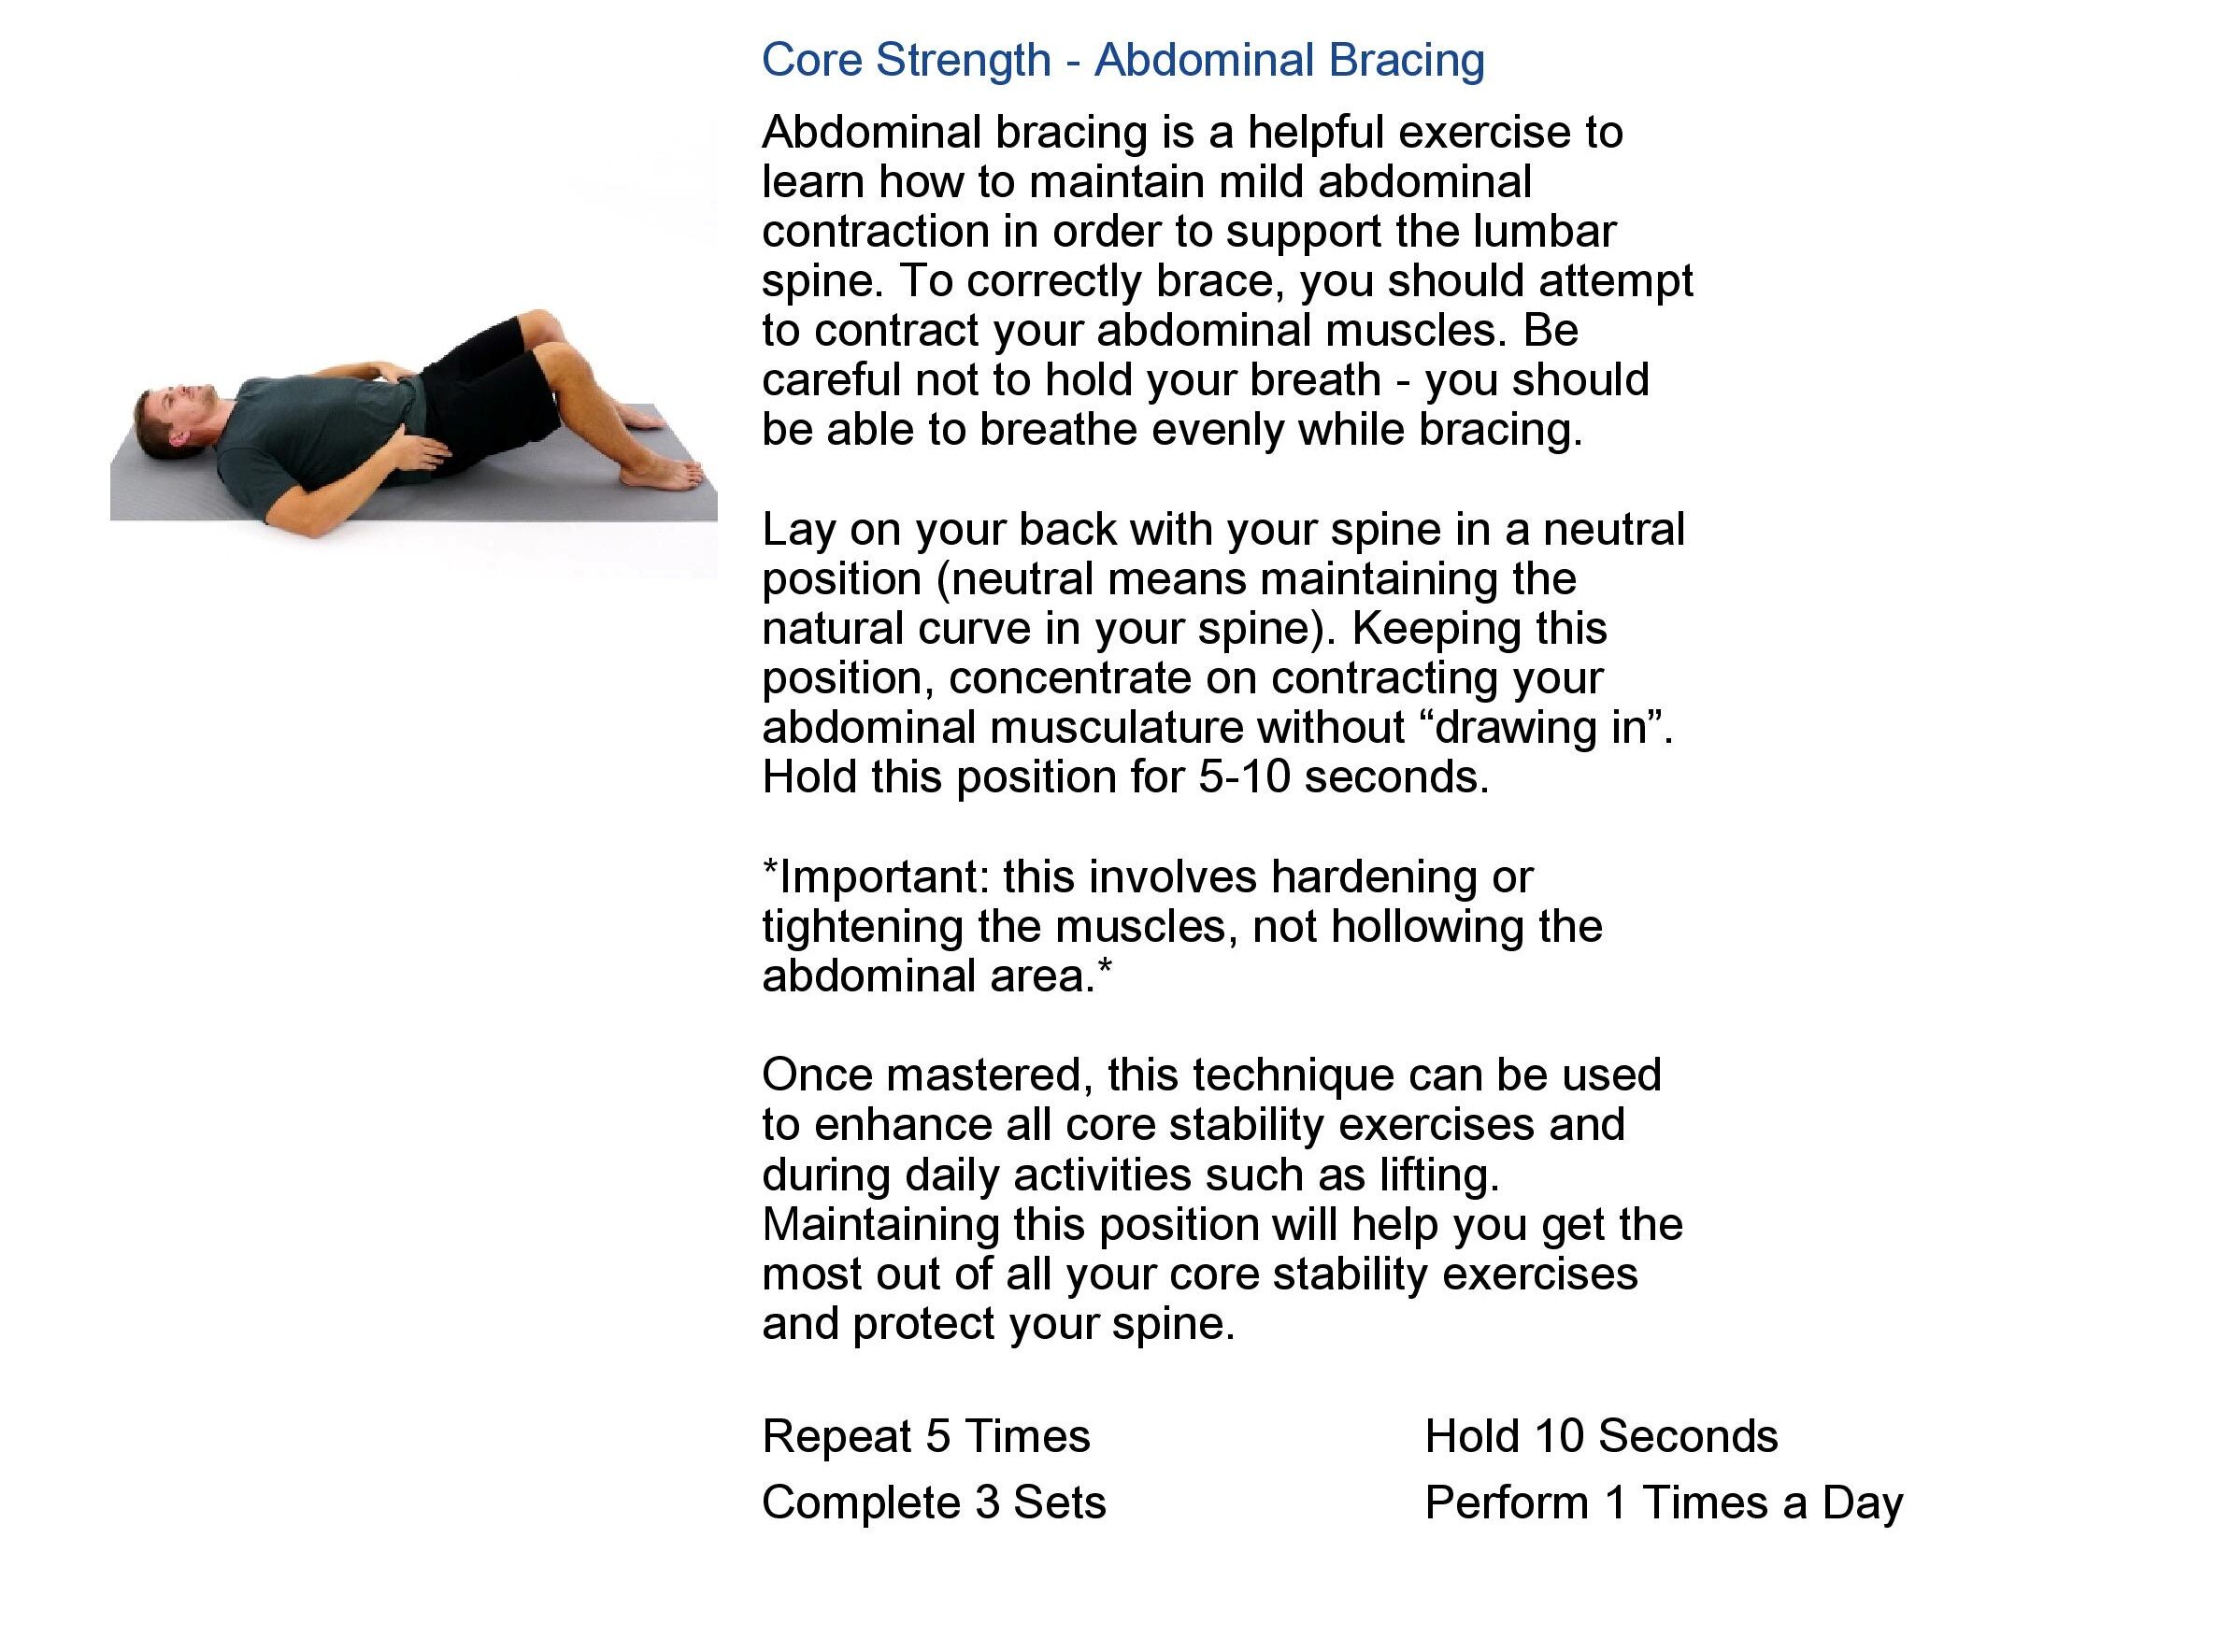 Strengthen Your Core So Your Back's Not Sore - Abdominal Bracing — Dr. Sean  Lamasz, Chiropractor